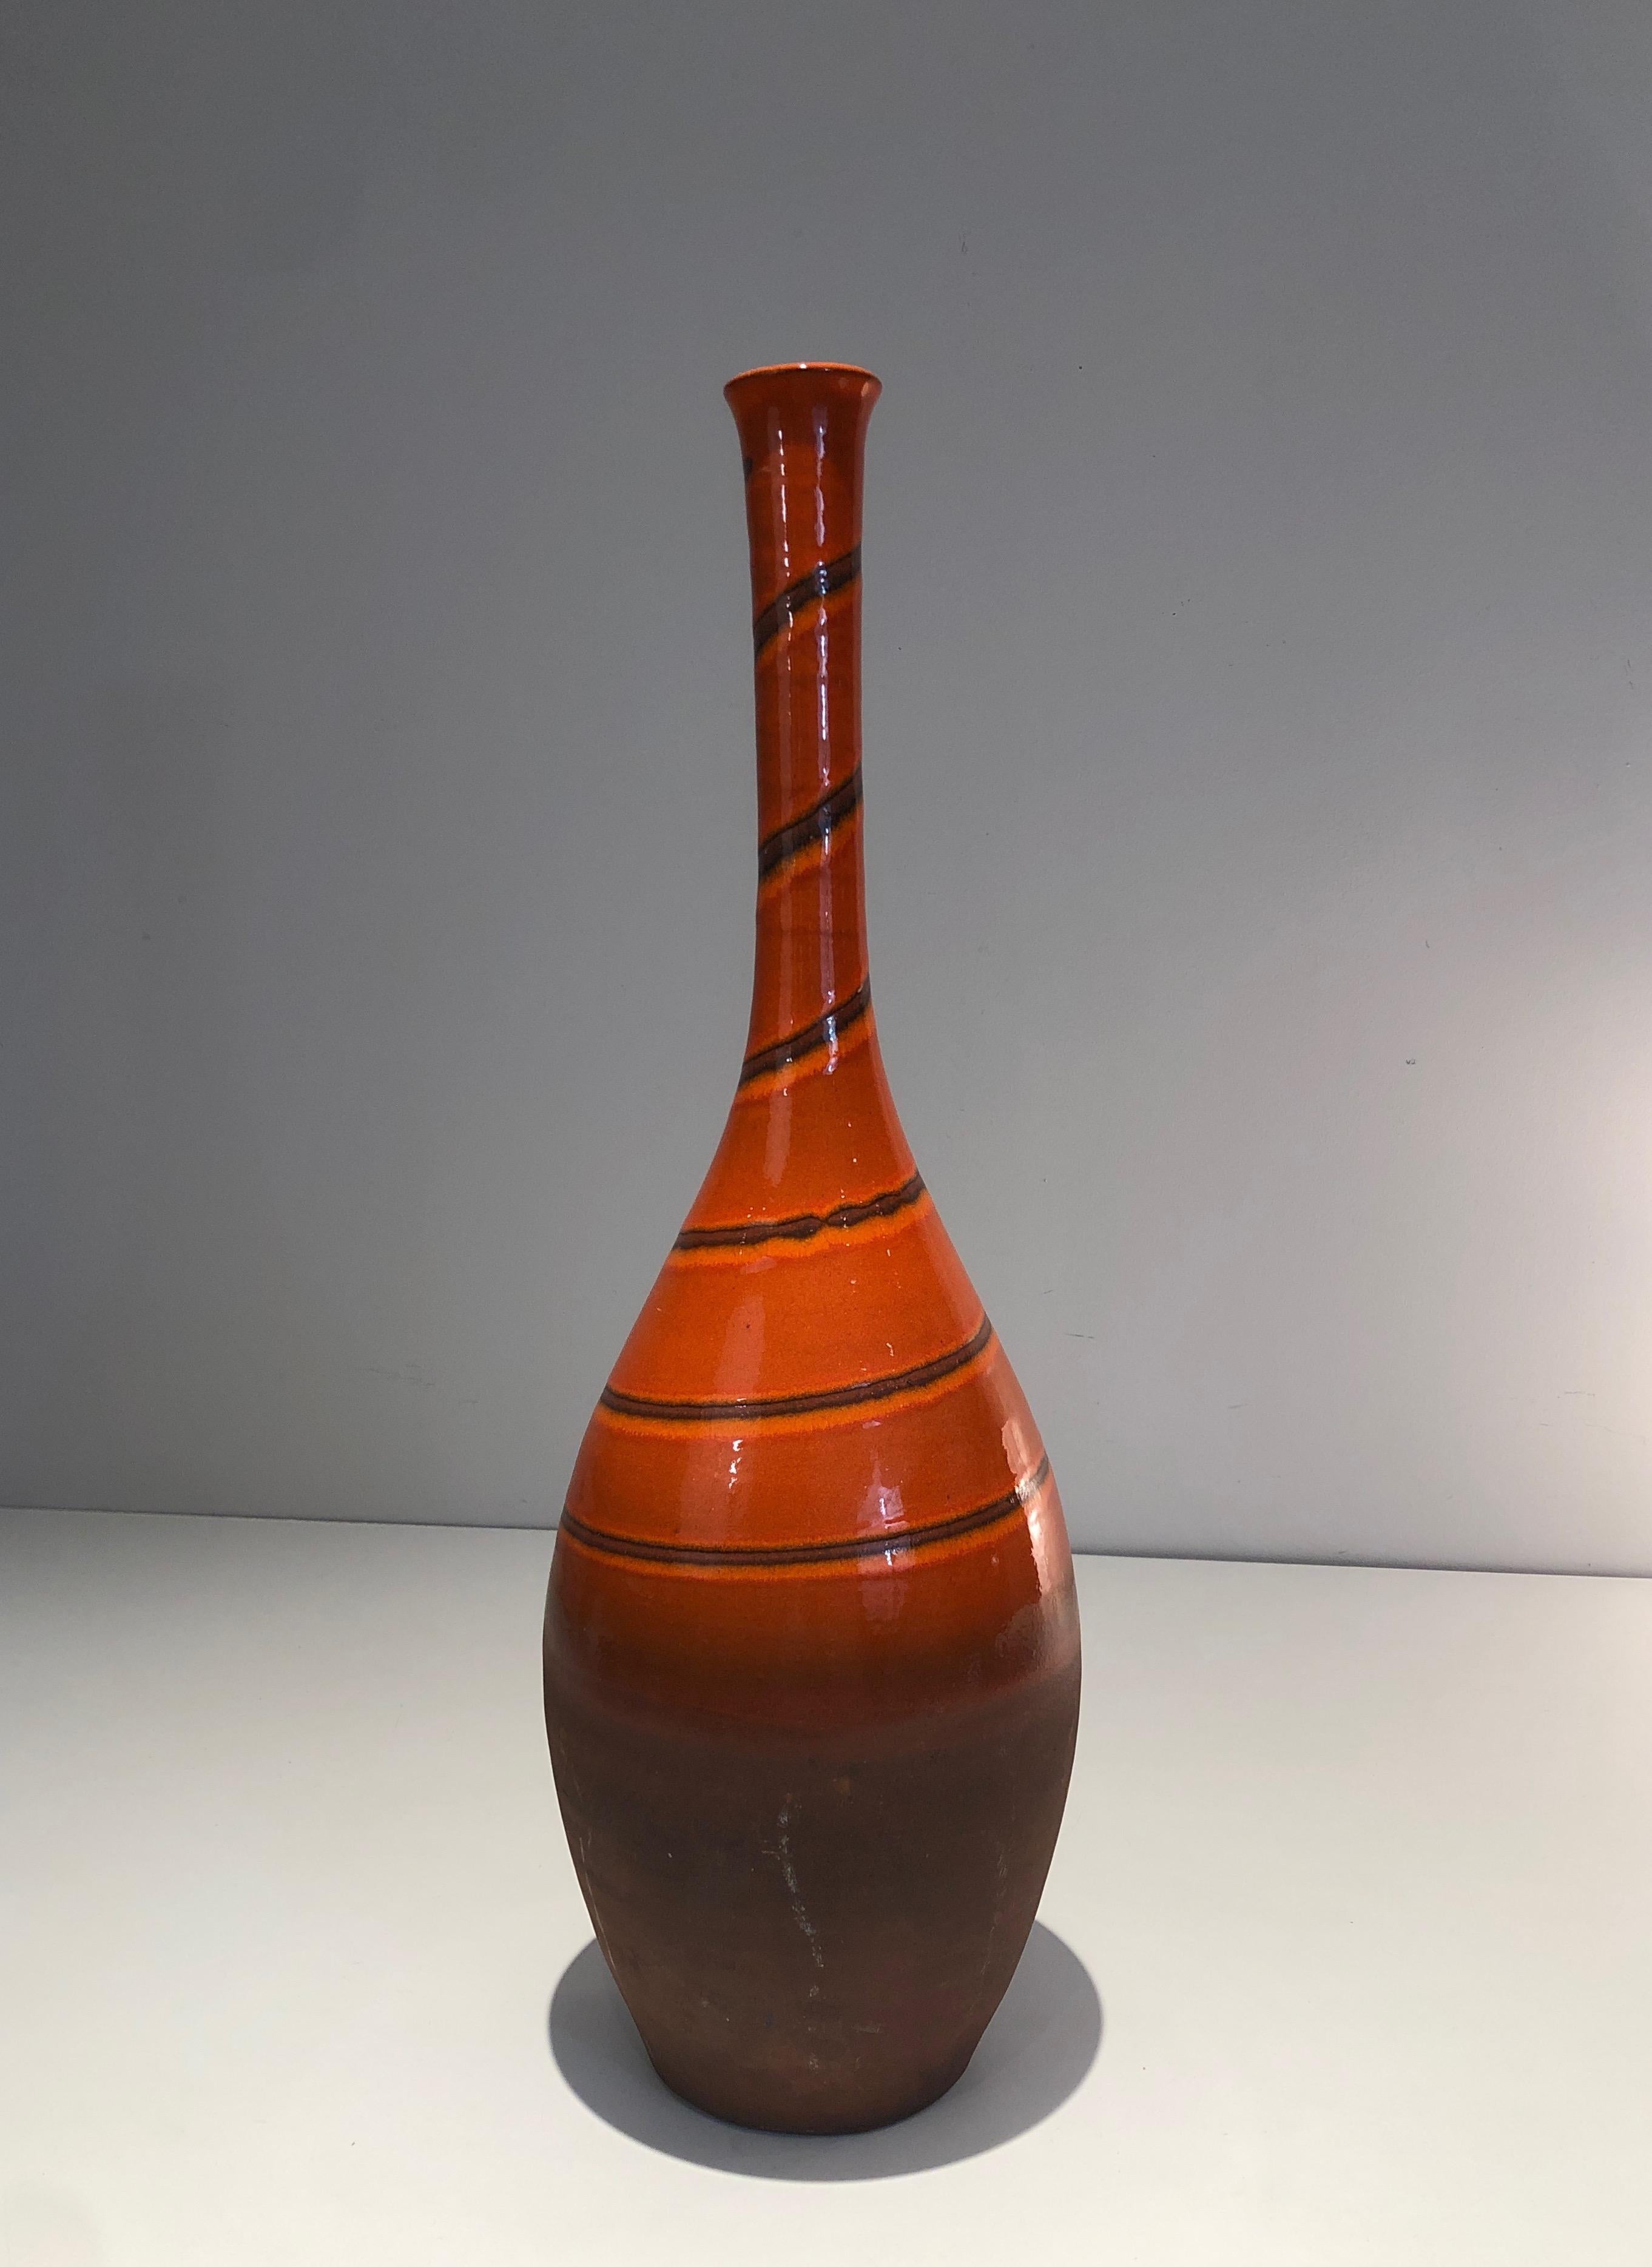 Tall Ceramic Vase in the Red-Orange Tones, French Work, Circa 1950 For Sale 5